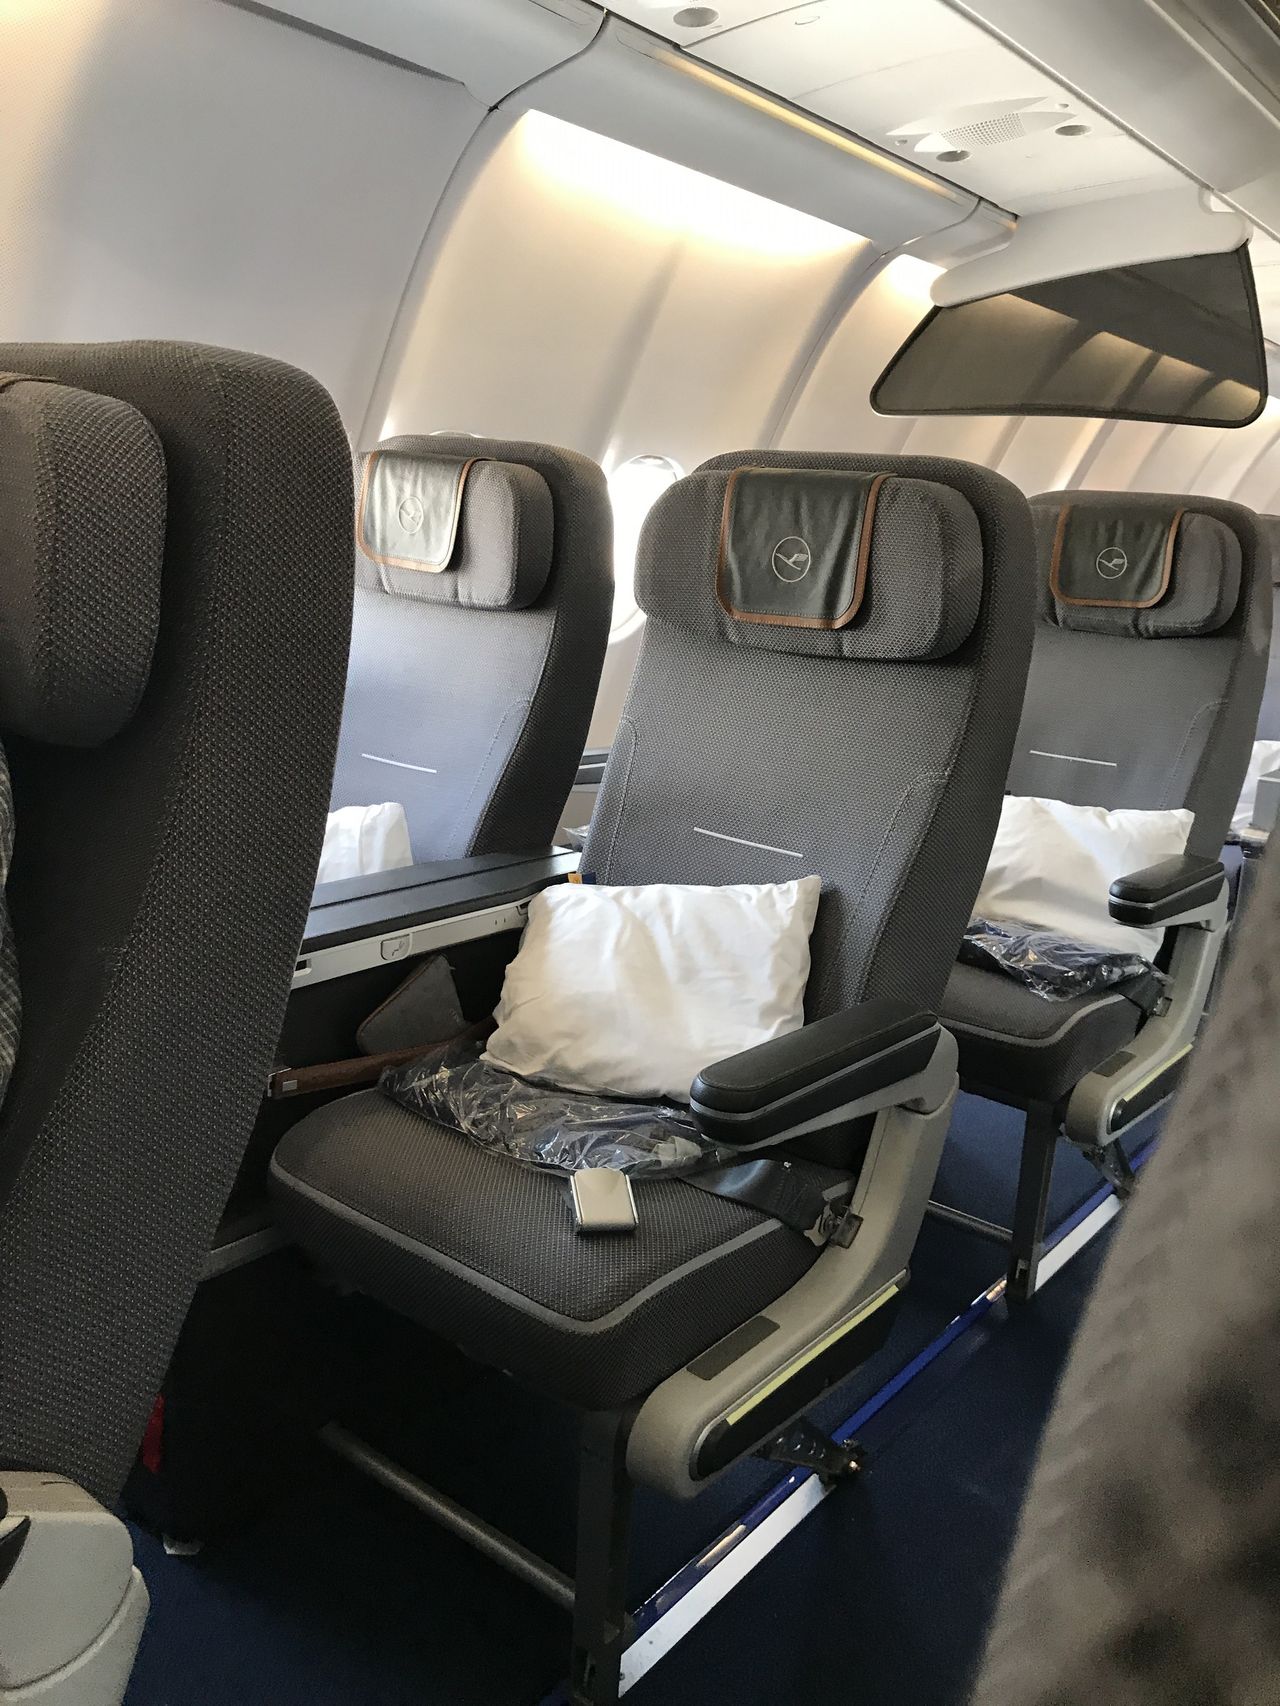 Review of Lufthansa flight from Munich to Miami in Premium Eco